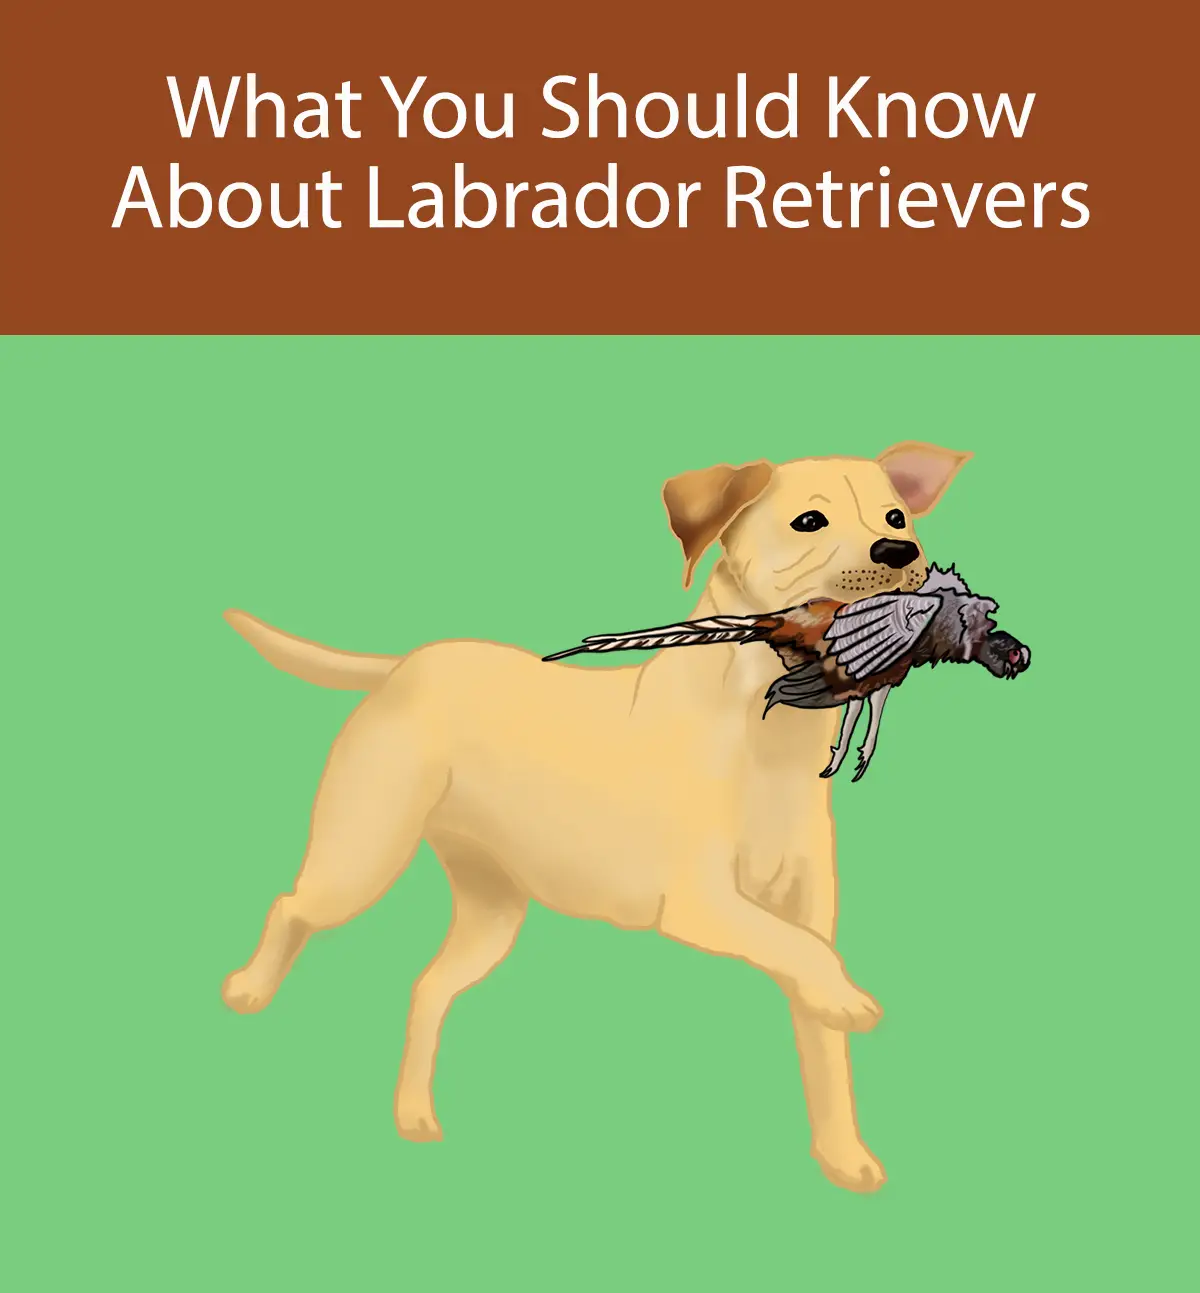 What You Should Know About Labrador Retrievers